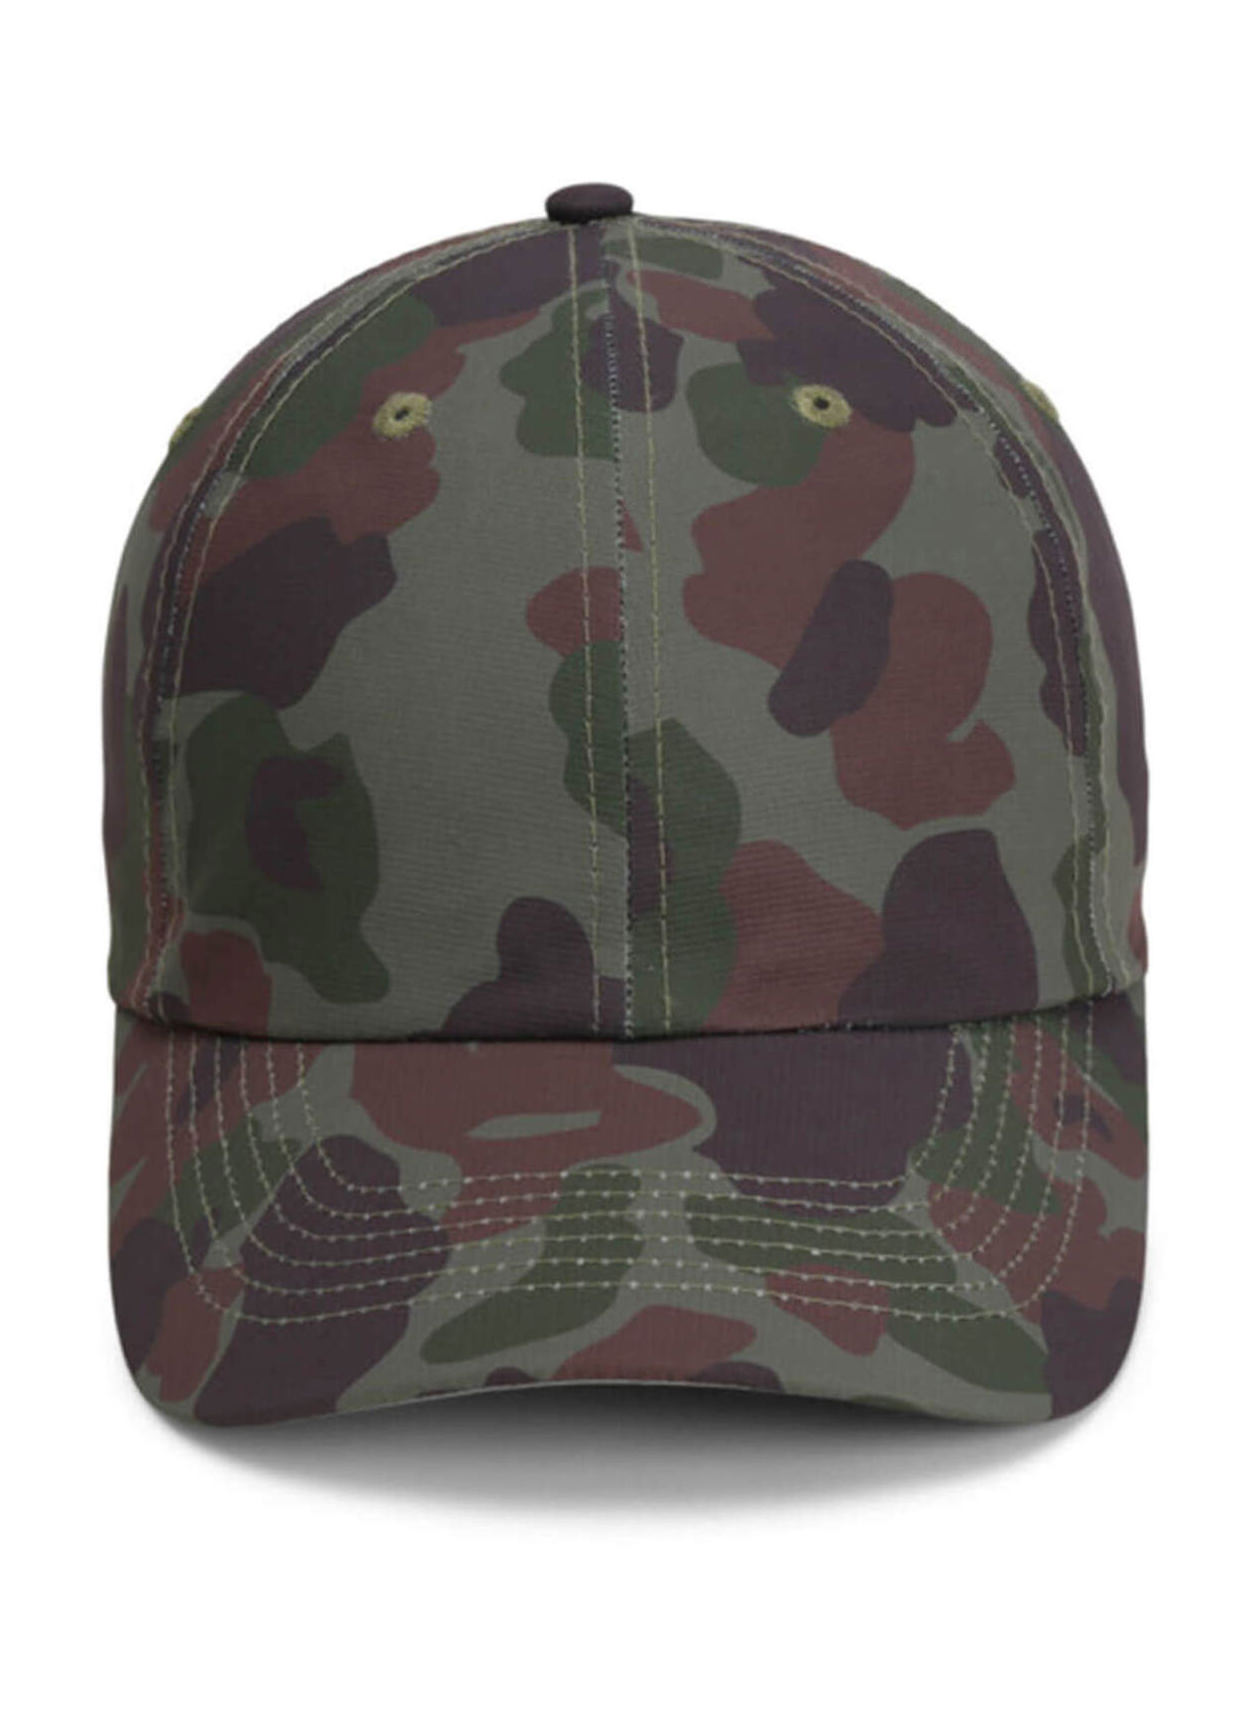 Imperial Frog Camo Green The Alter Ego Pattered Performance Hat